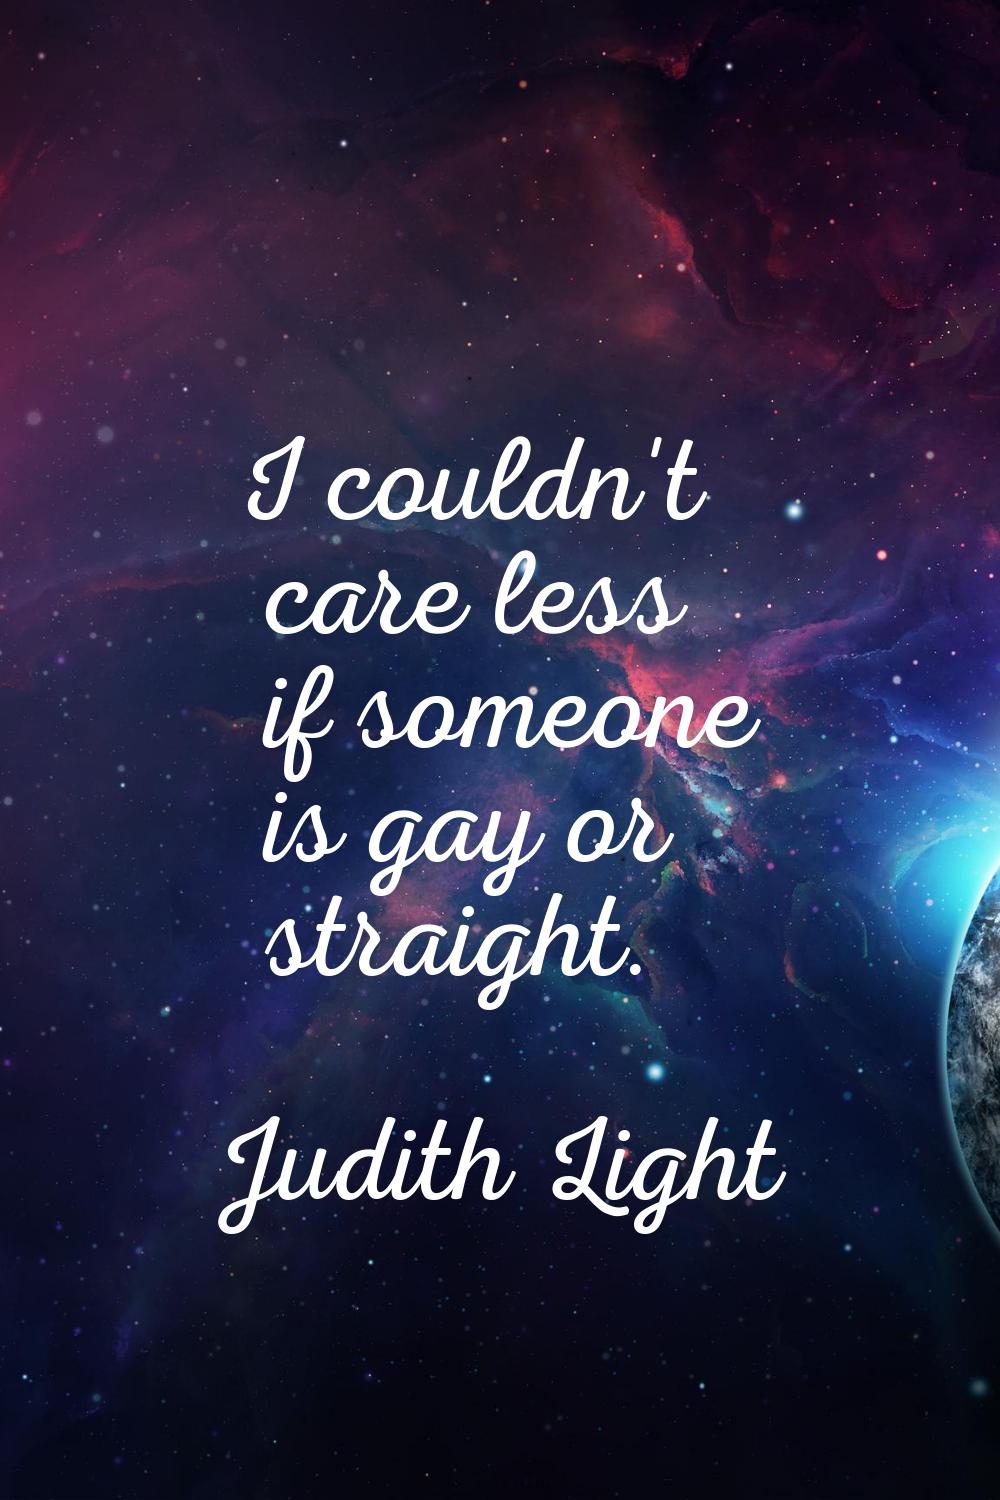 I couldn't care less if someone is gay or straight.